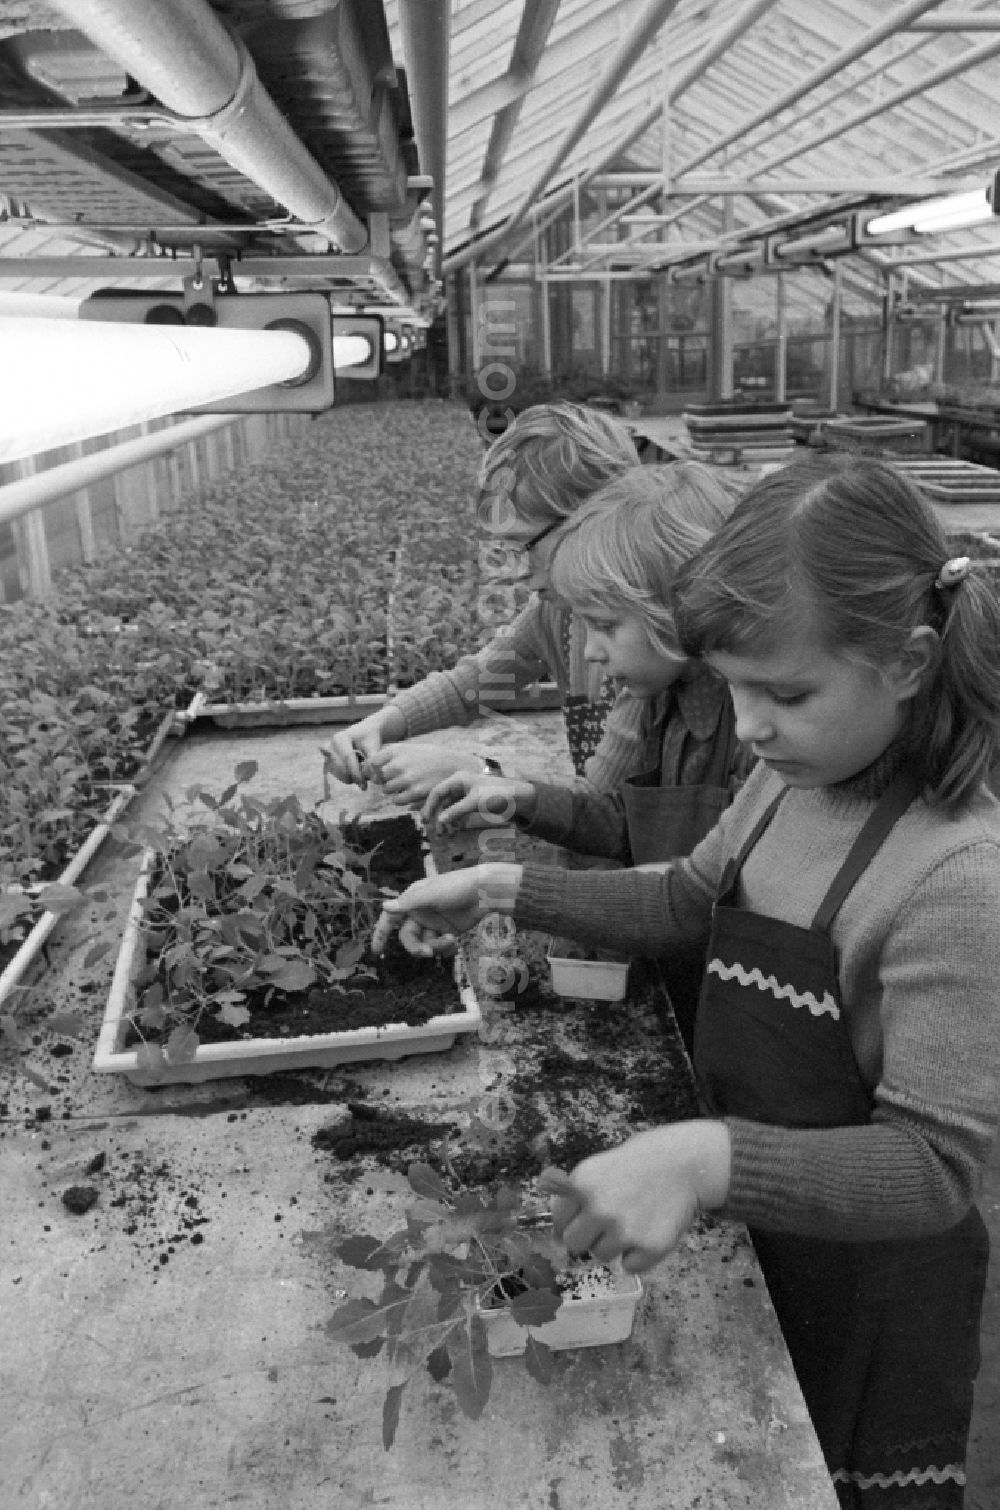 GDR picture archive: Berlin - The children of a third grade are looking for small seedlings to plant in the prefabricated flower beds in one of the large greenhouses of the Central School Garden in the Persiusstrasse in the district Bezirk Friedrichshain in Berlin, the former capital of the GDR, German Democratic Republic